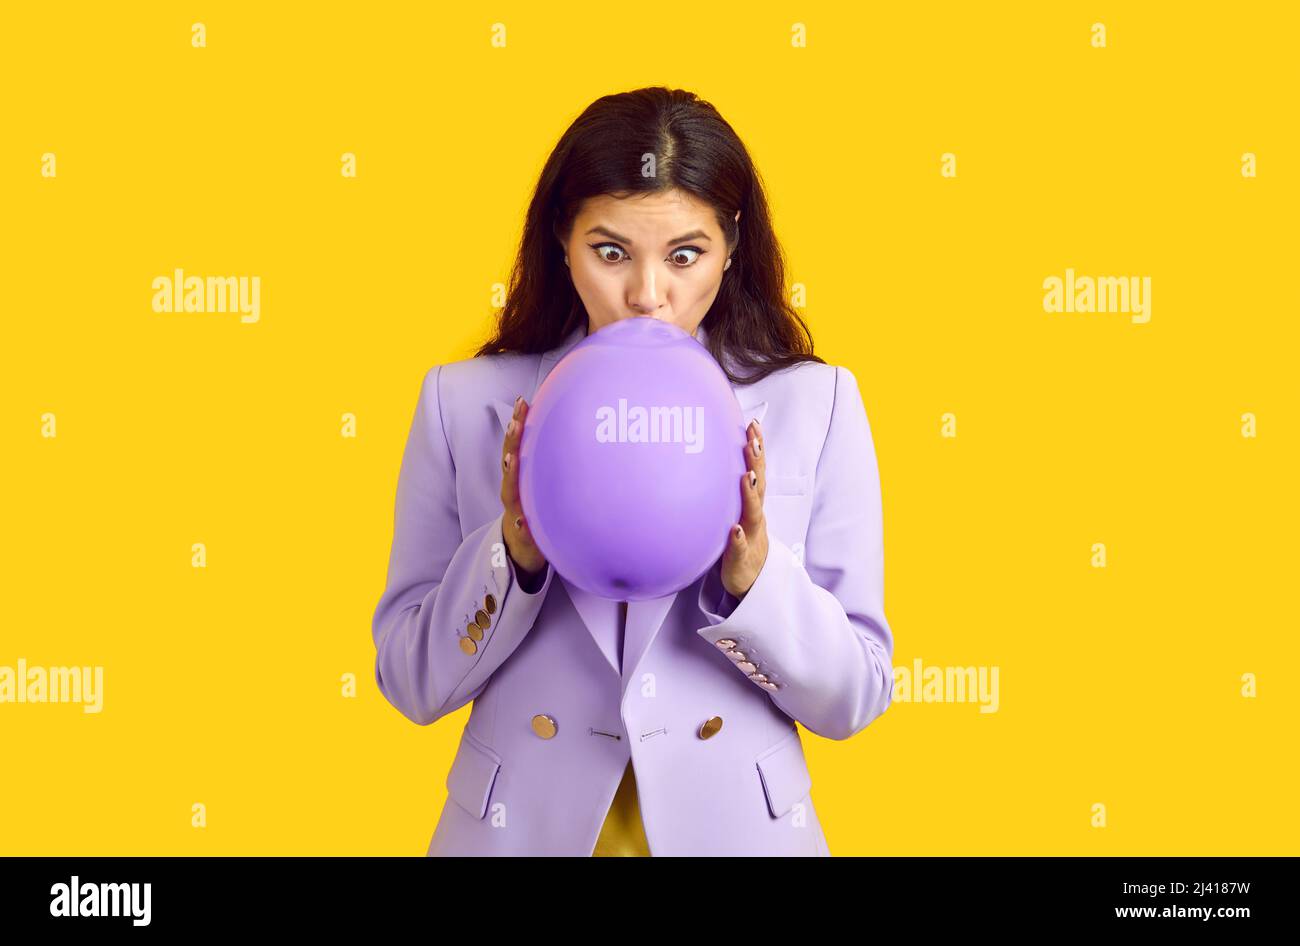 Beautiful woman isolated on yellow background inflating purple balloon with funny face expression Stock Photo